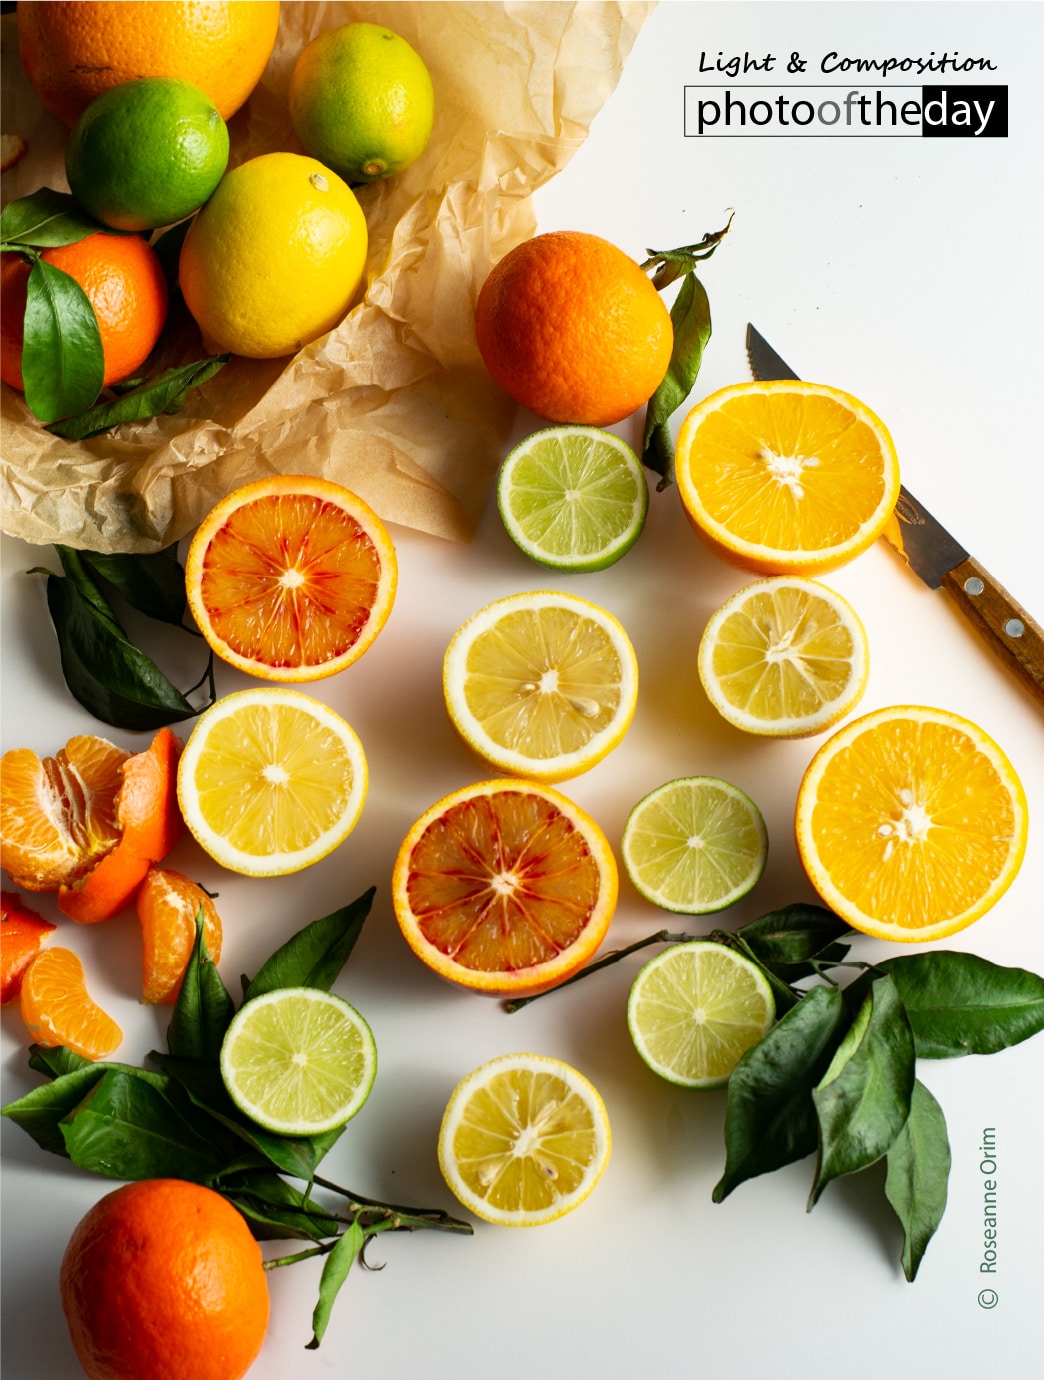 When Life Gives You Citrus... by Roseanne Orim